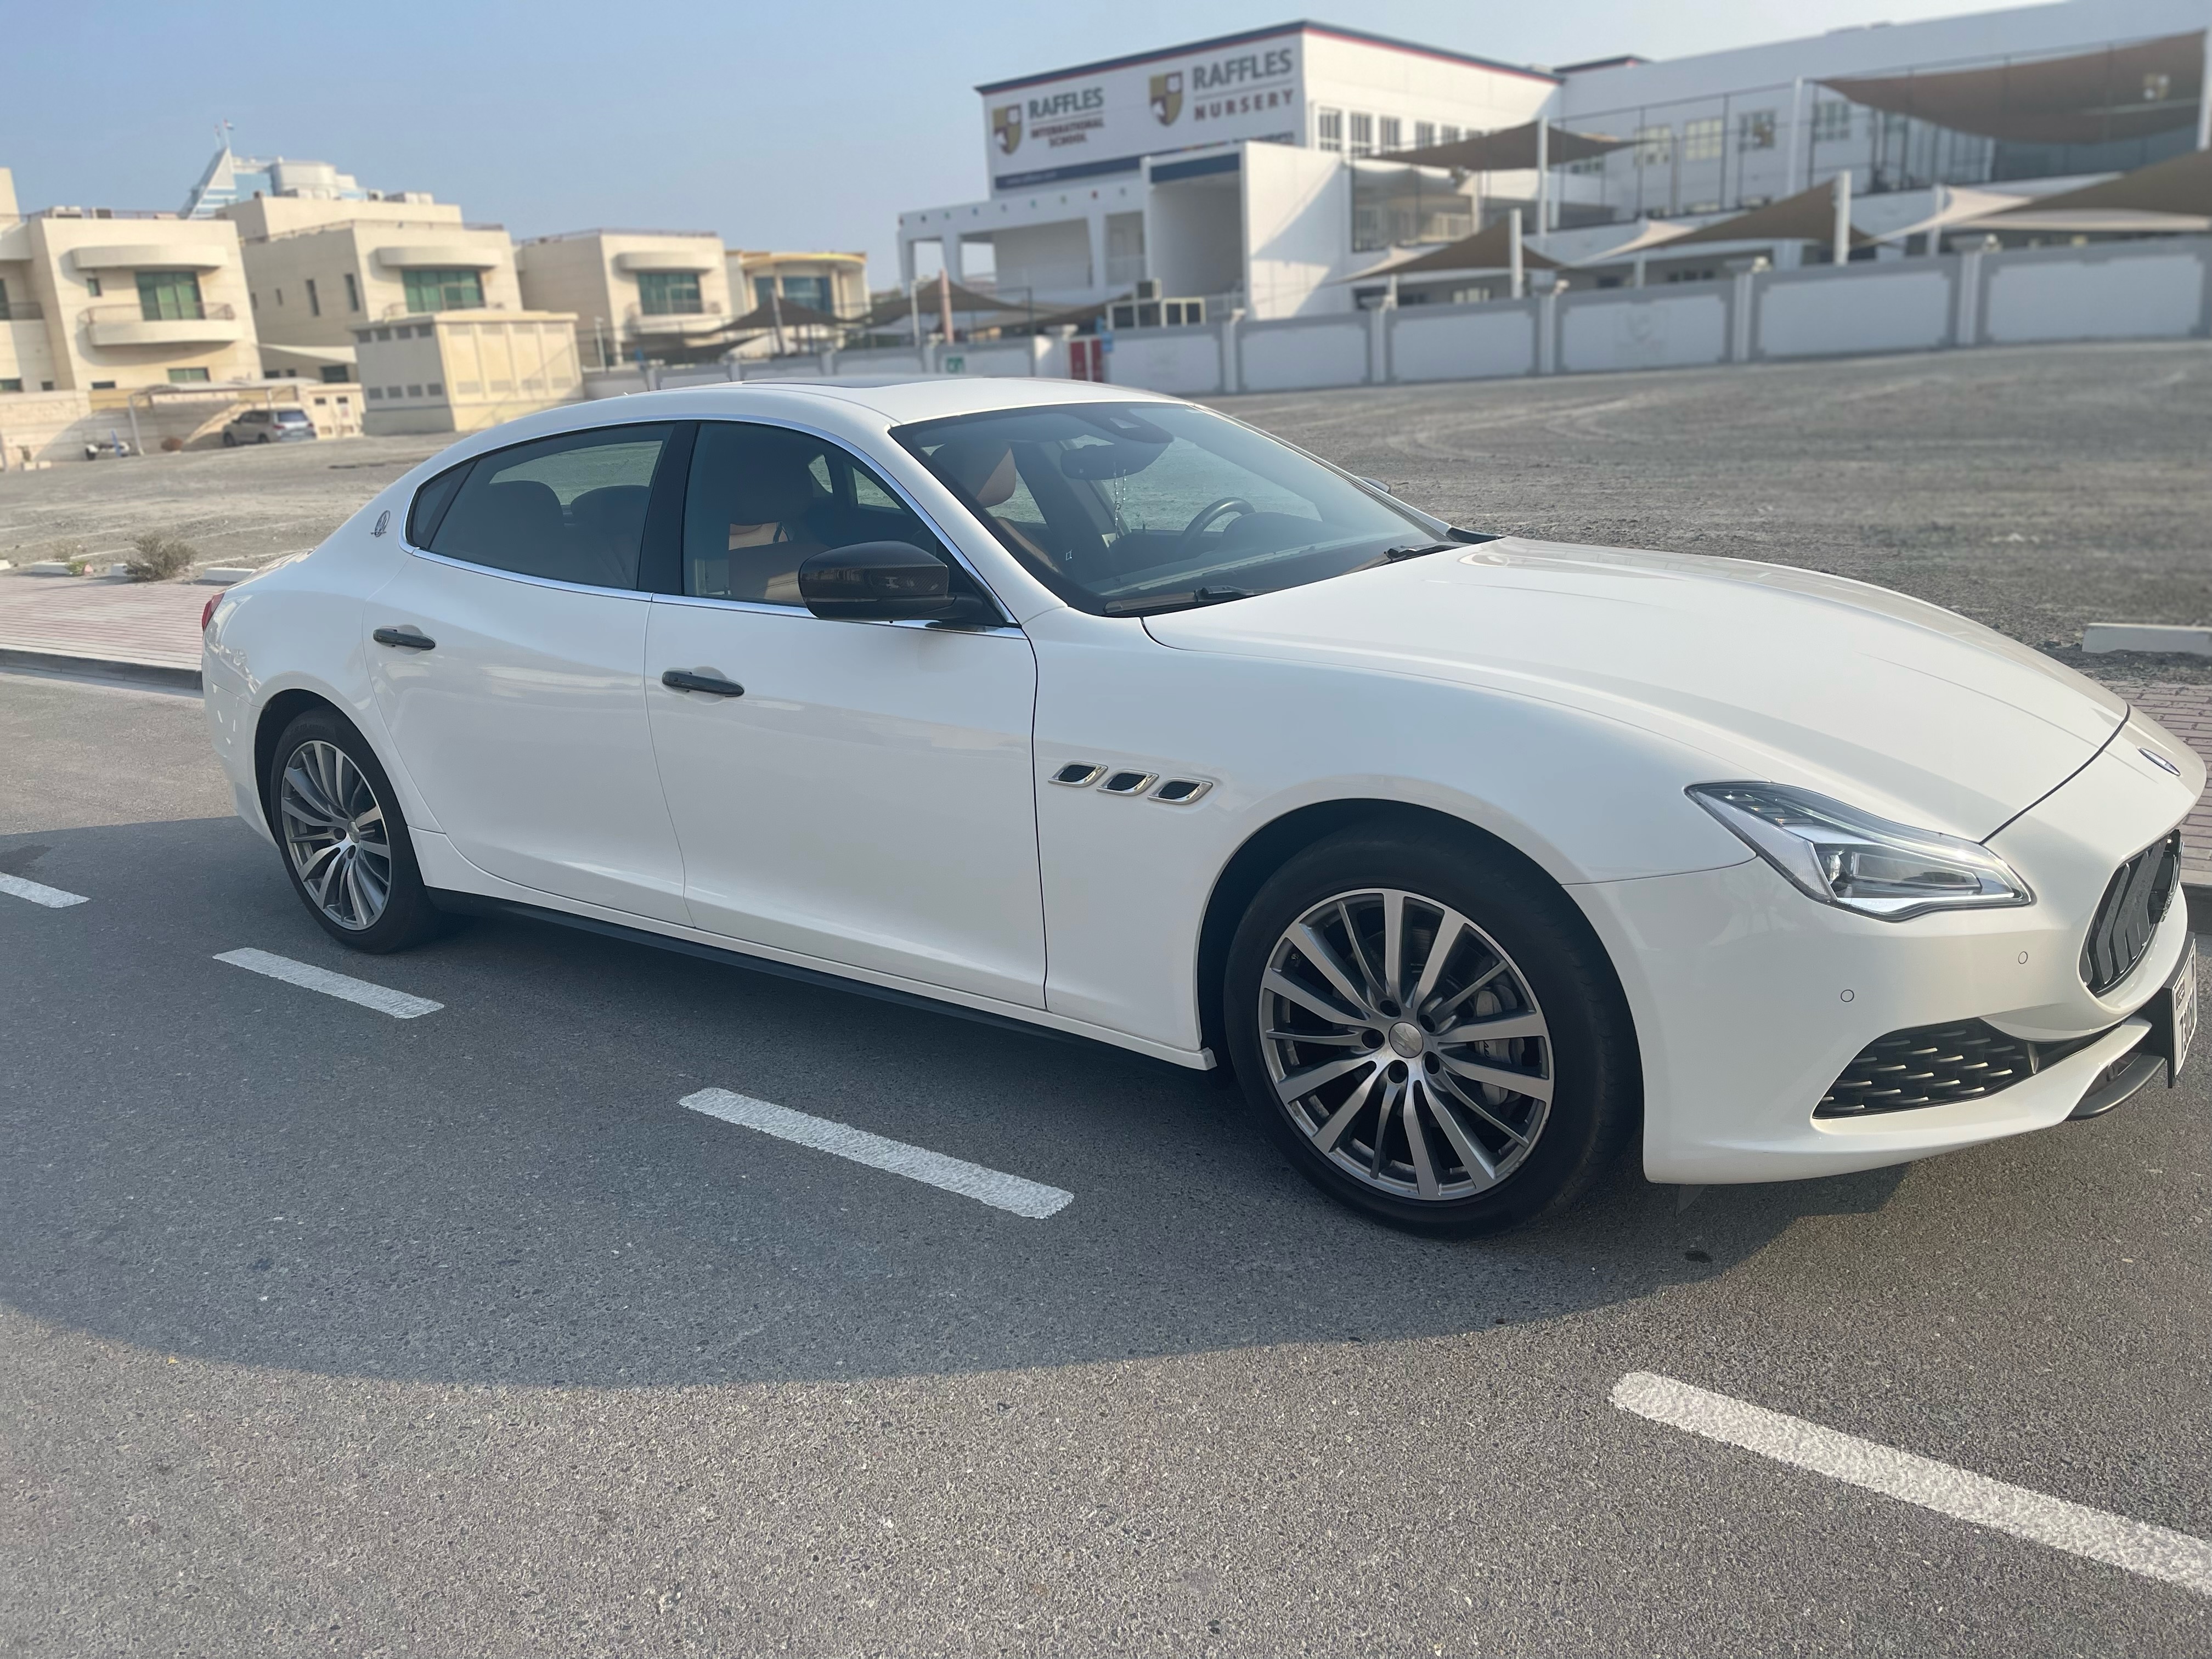 Luxury 2020 Maserati Quattroporte S with full manufacturer maintainance and warranty until Oct’ 2025-pic_2